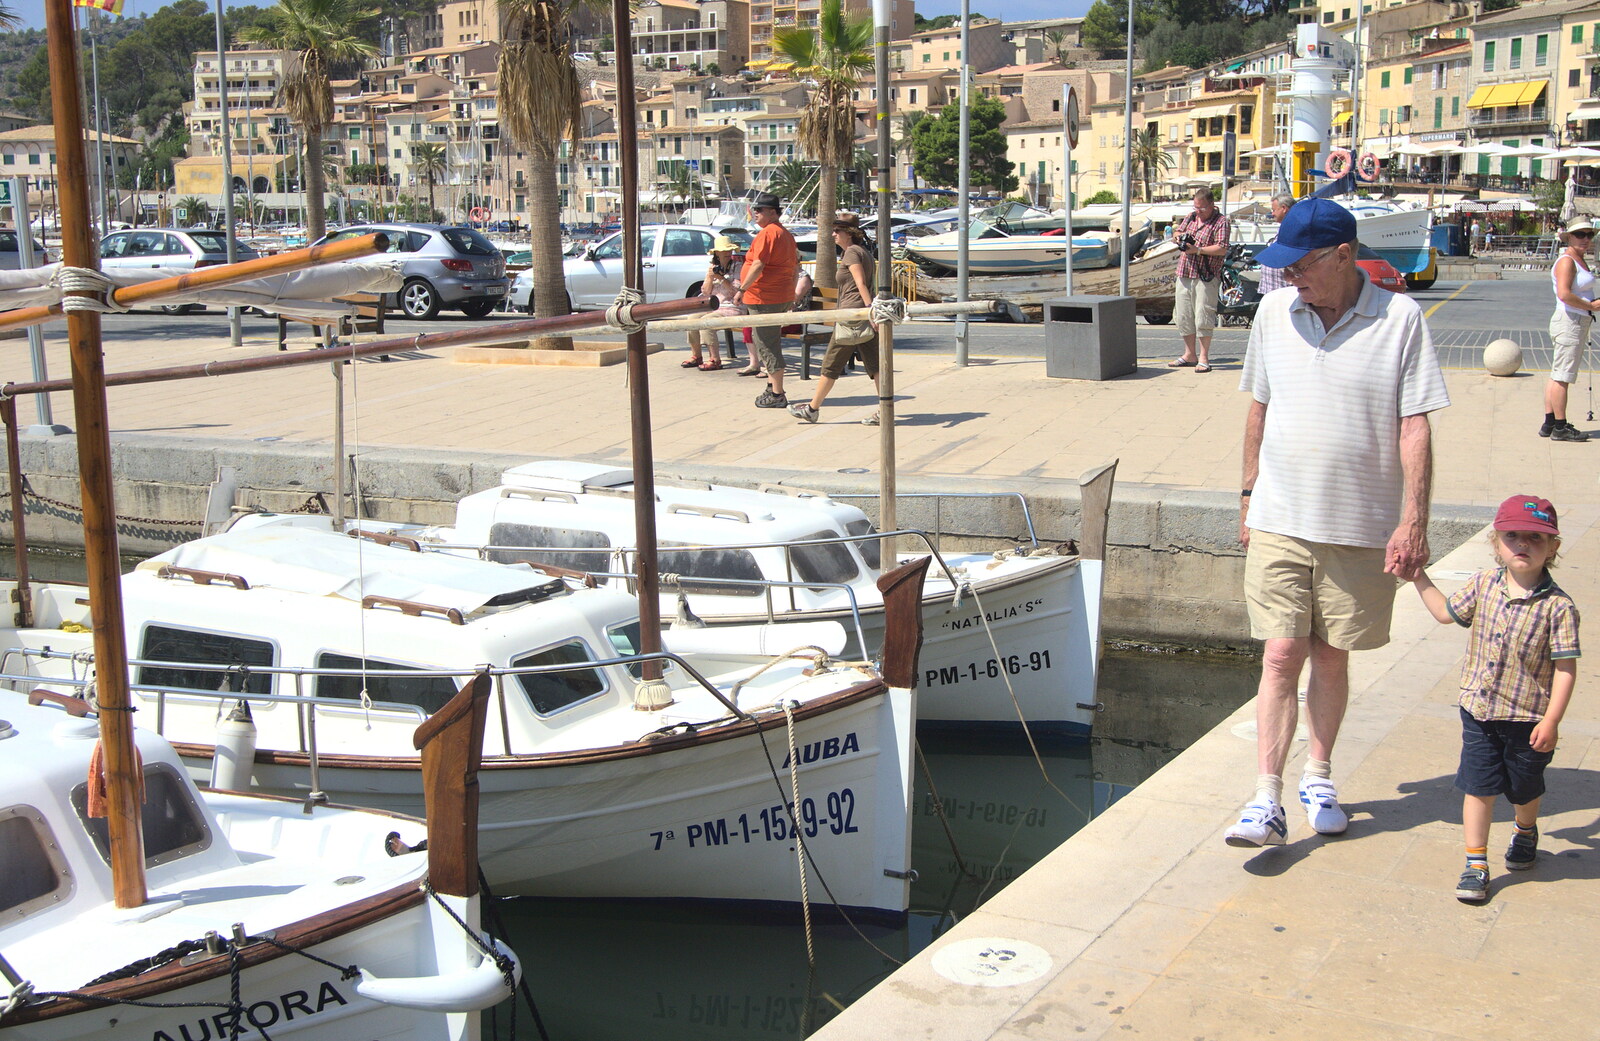 Grandad and Fred look at the boats from A Trip to Sóller, Mallorca, Spain - 8th-14th September 2012